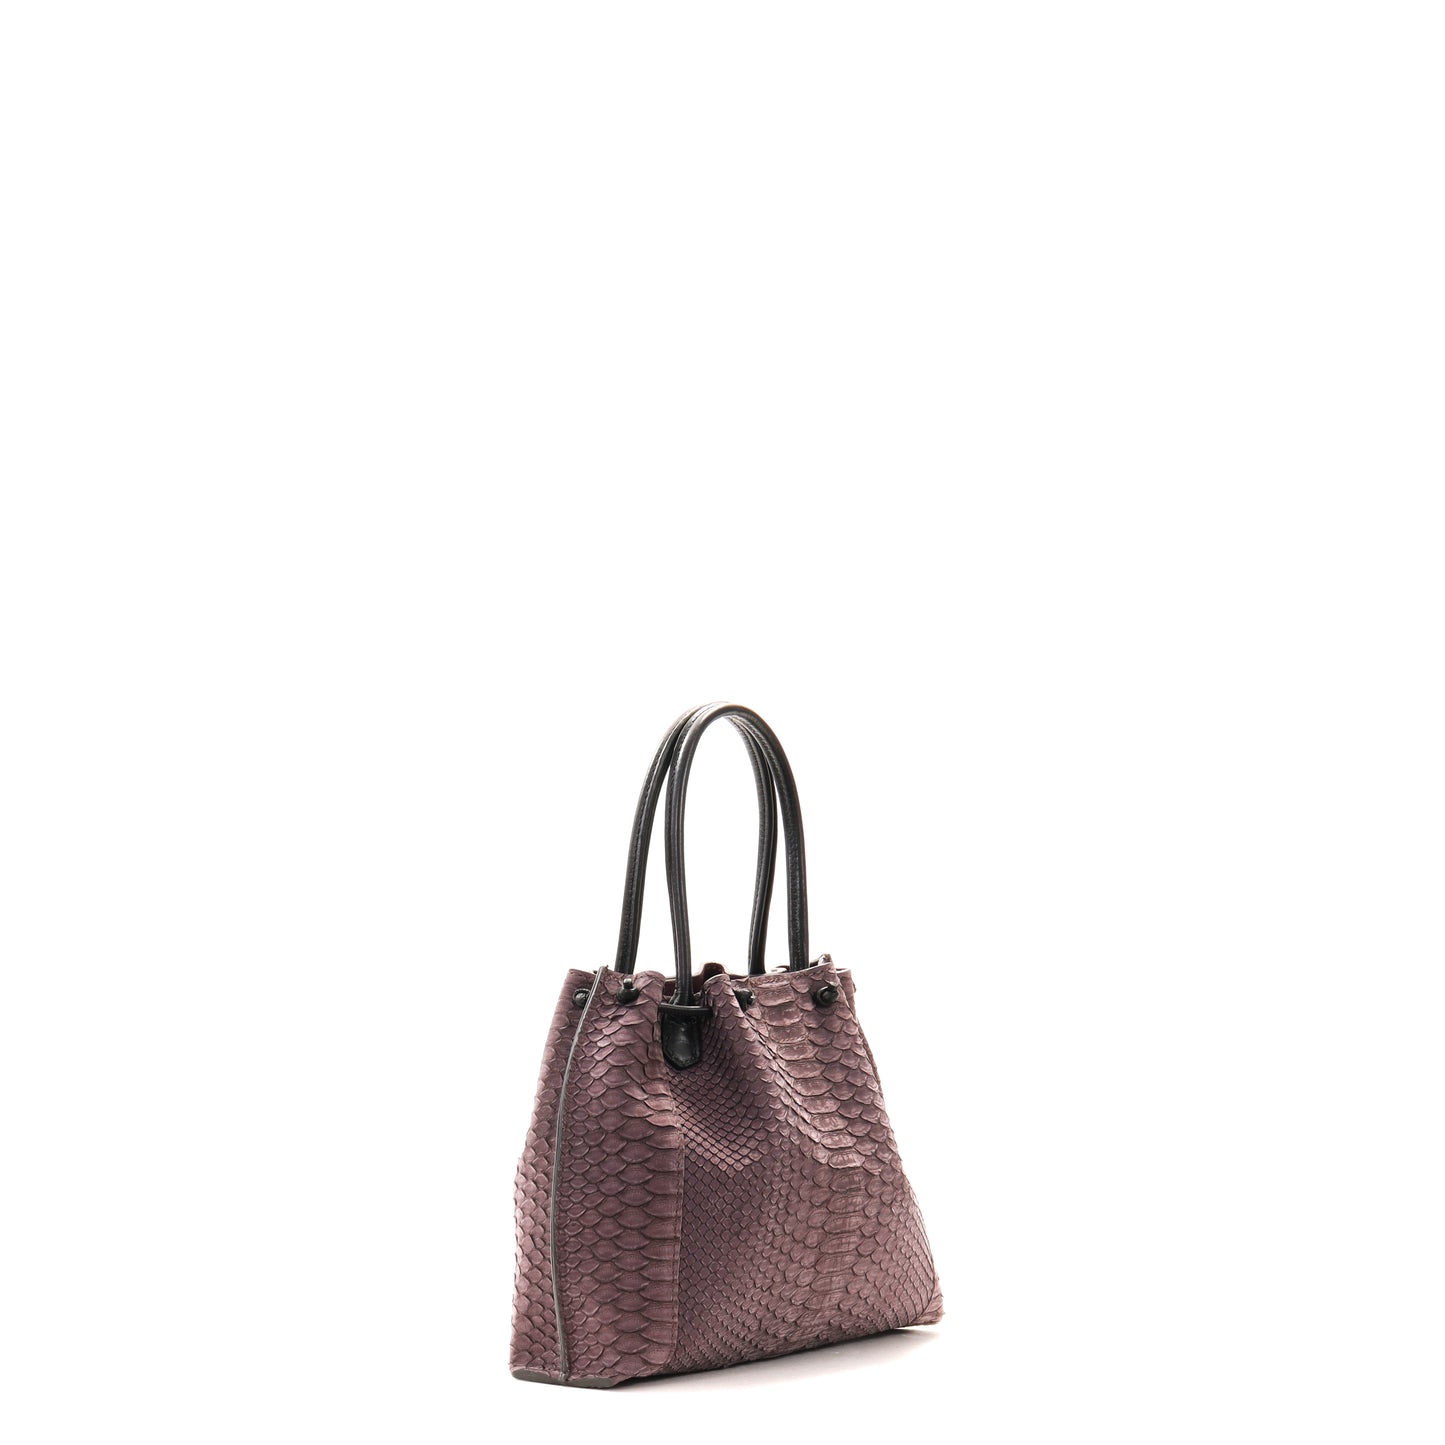 MINI PUCKERED TOTE PETROL SUEDED PYTHON